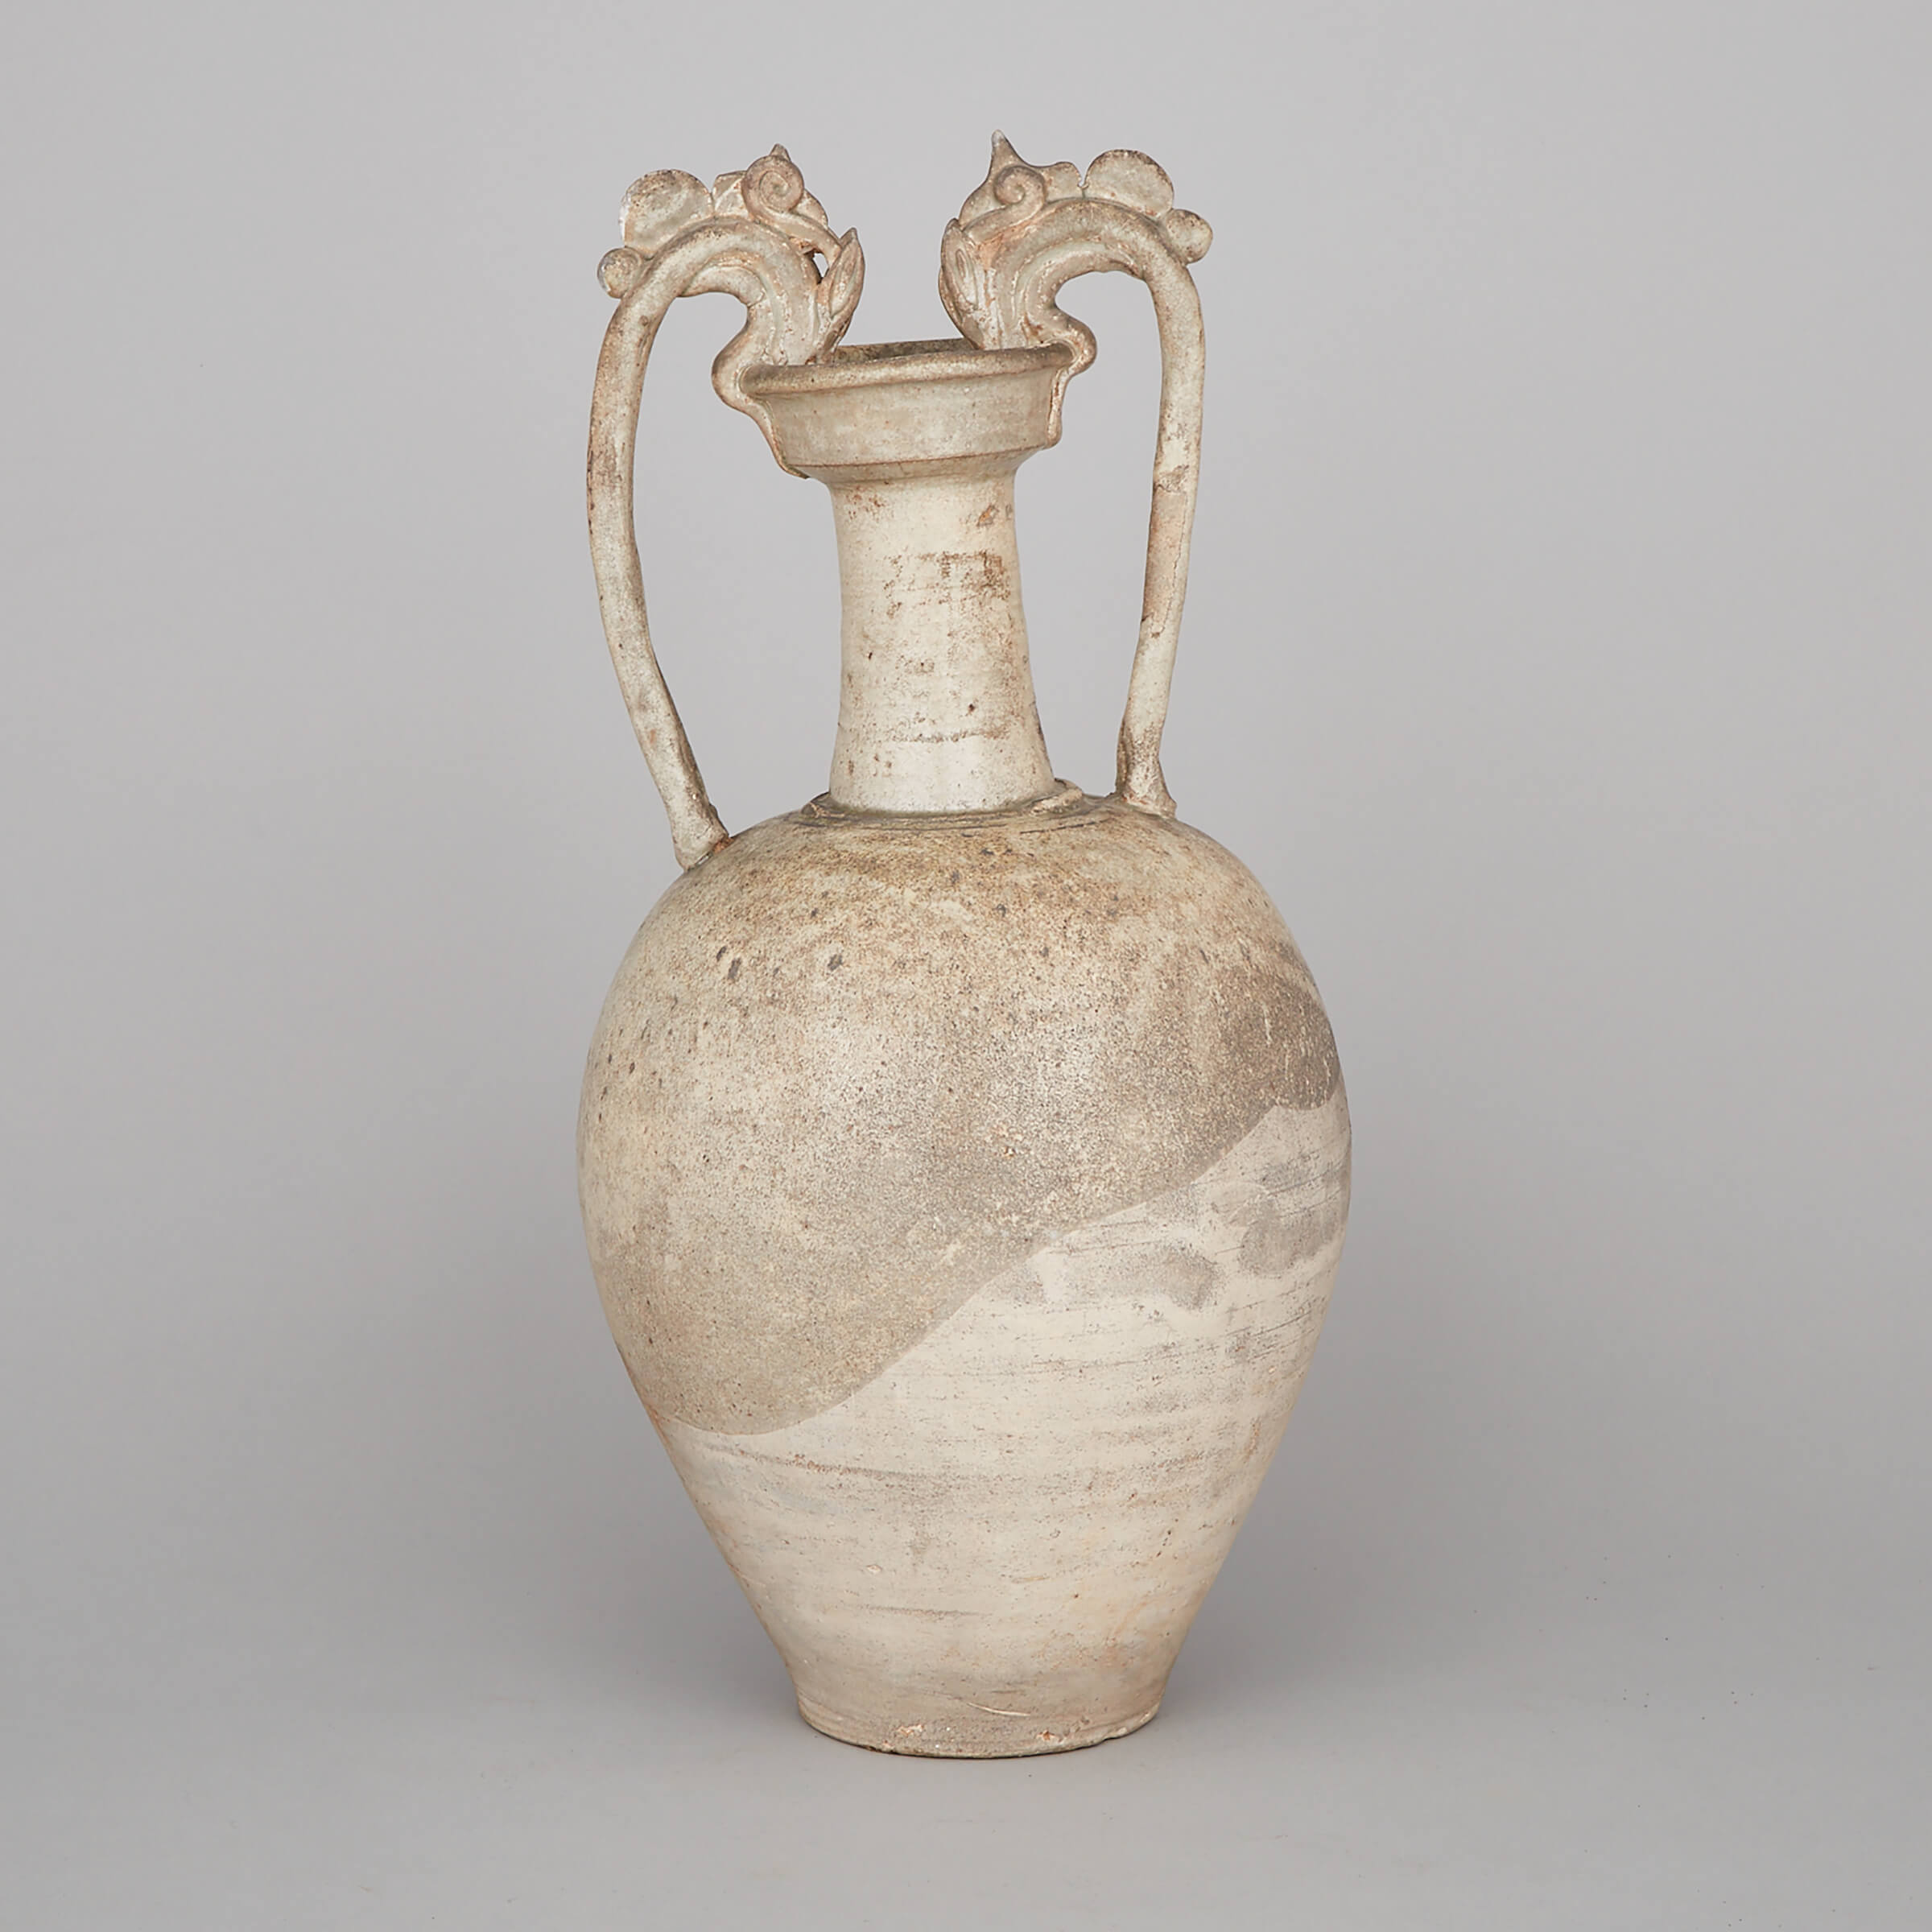 A Tang-Style Amphora, 8th Century or Later